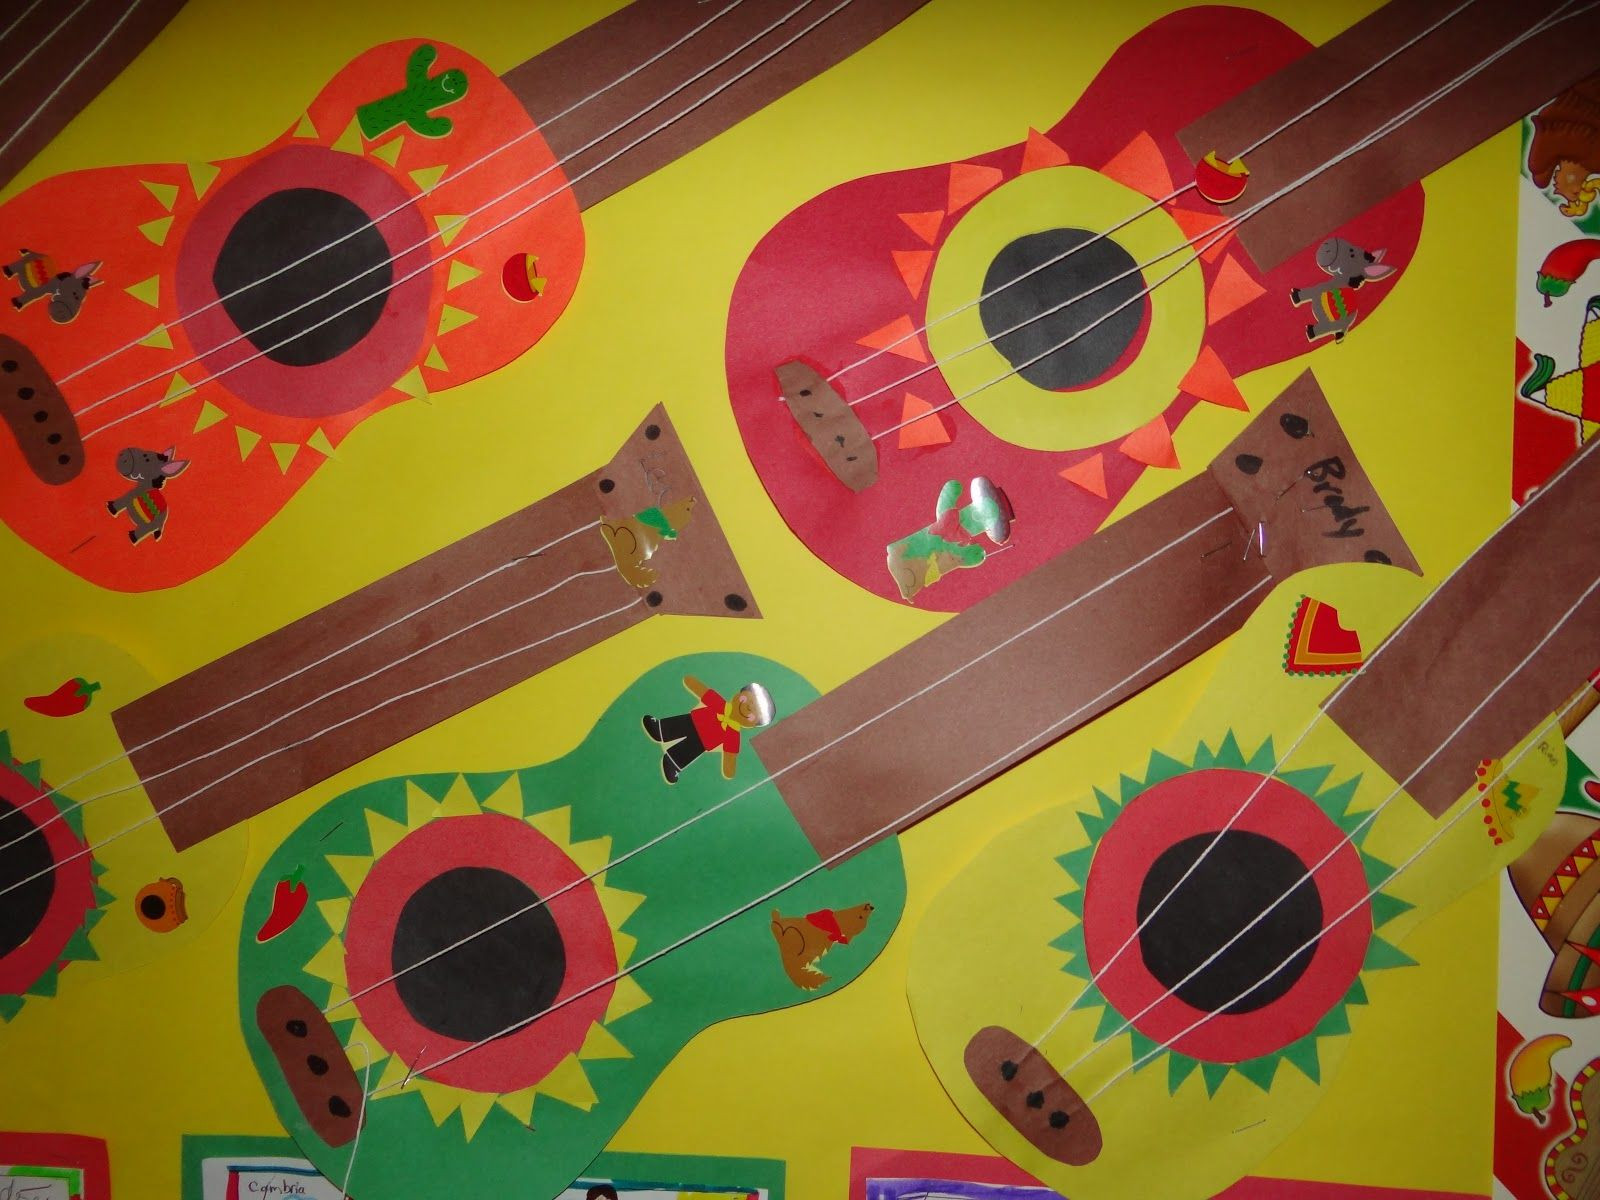 Cinco De Mayo Arts And Crafts Ideas
 Guitar craft just in time for Cinco de Mayo